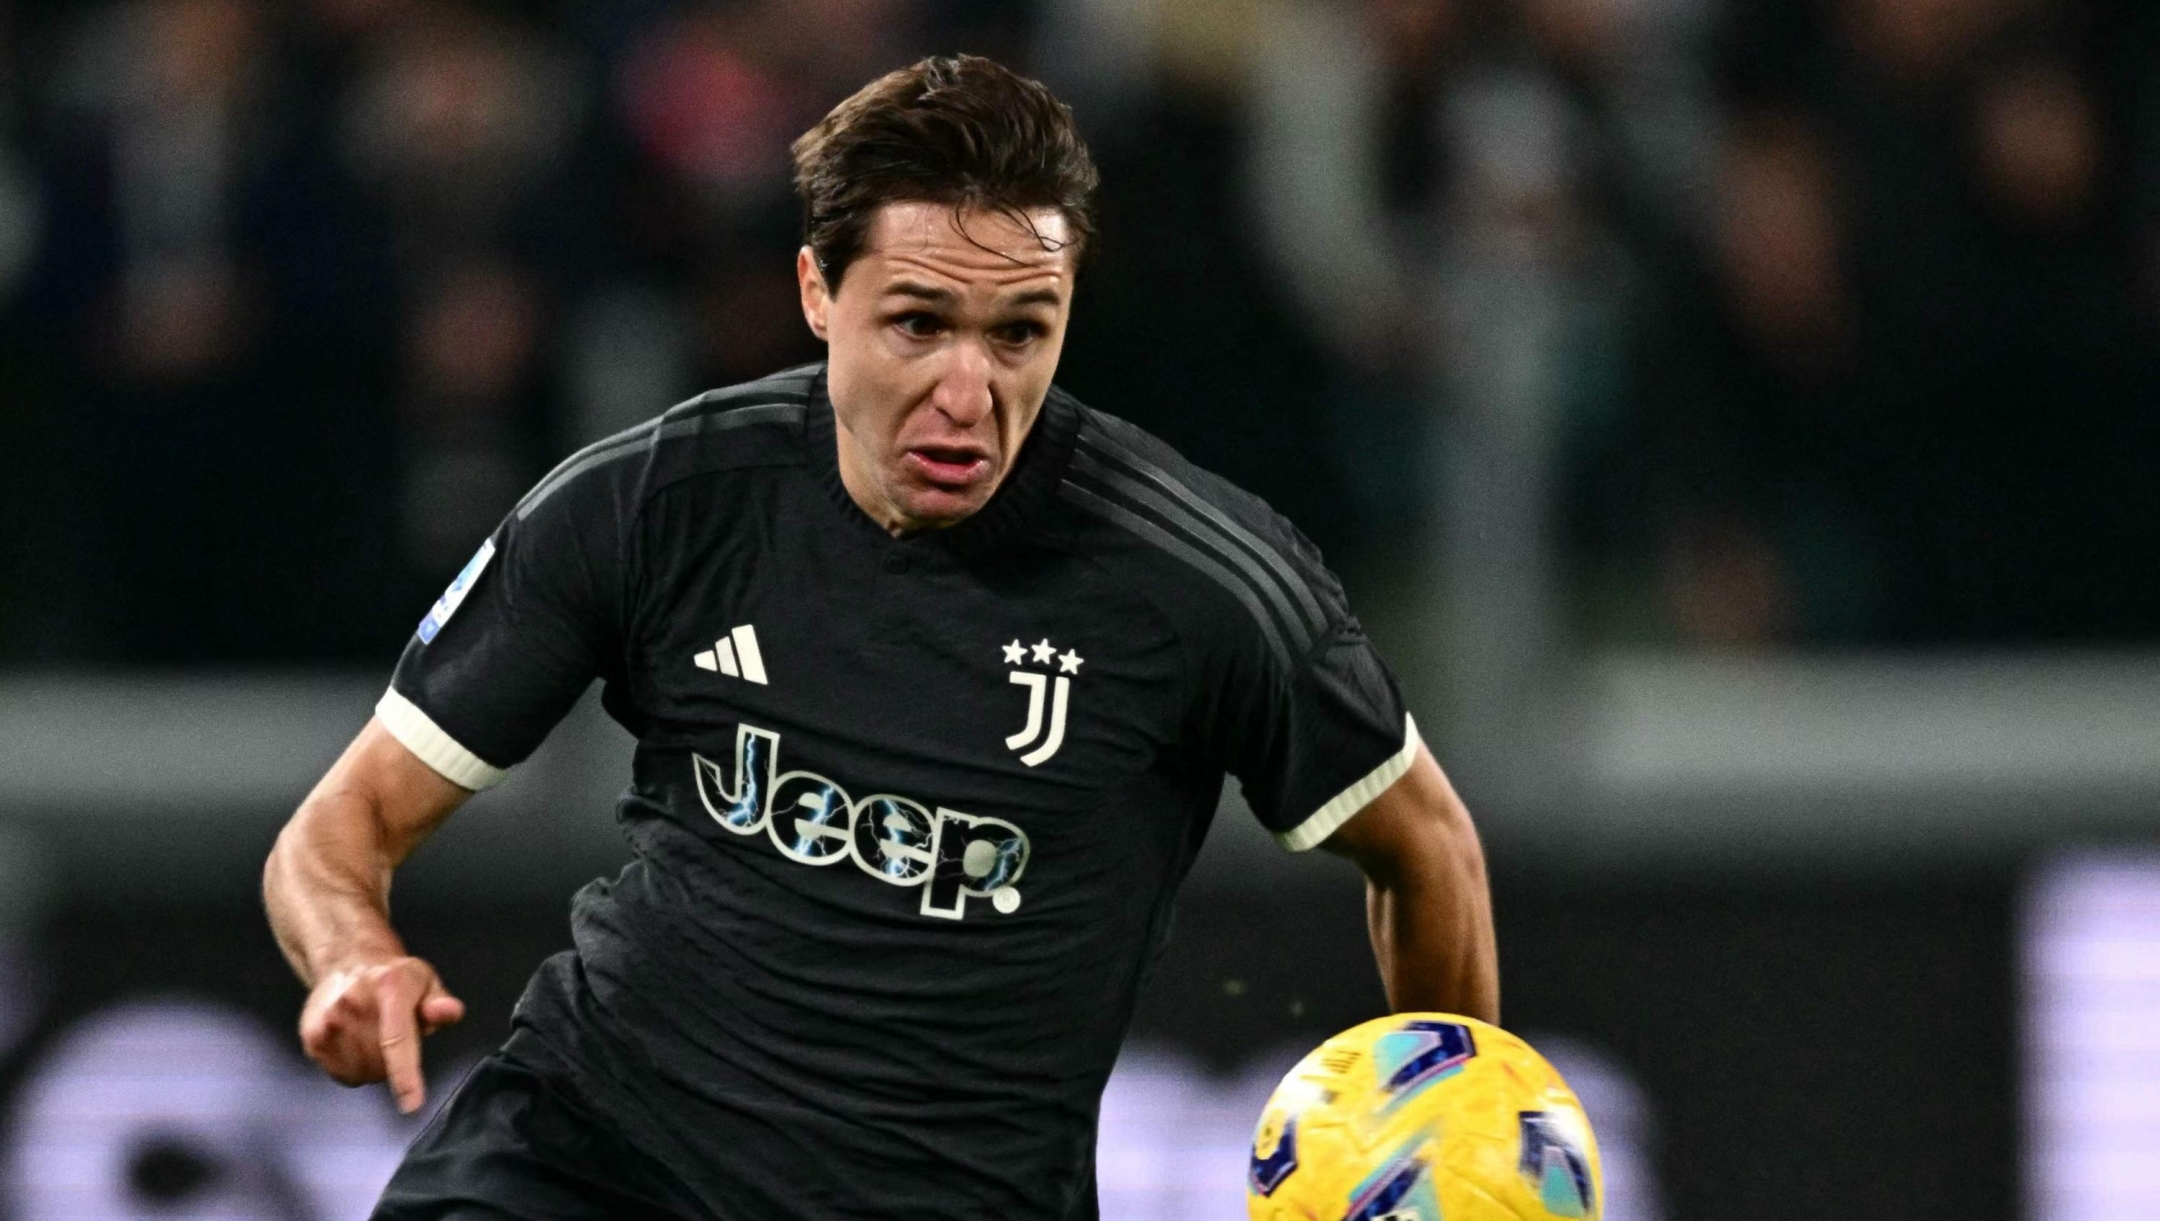 Juventus' Italian forward #07 Federico Chiesa eyes the ball during the Italian Serie A football match between Juventus and Cagliari, at The Allianz Stadium, in Turin on November 11, 2023. (Photo by GABRIEL BOUYS / AFP)